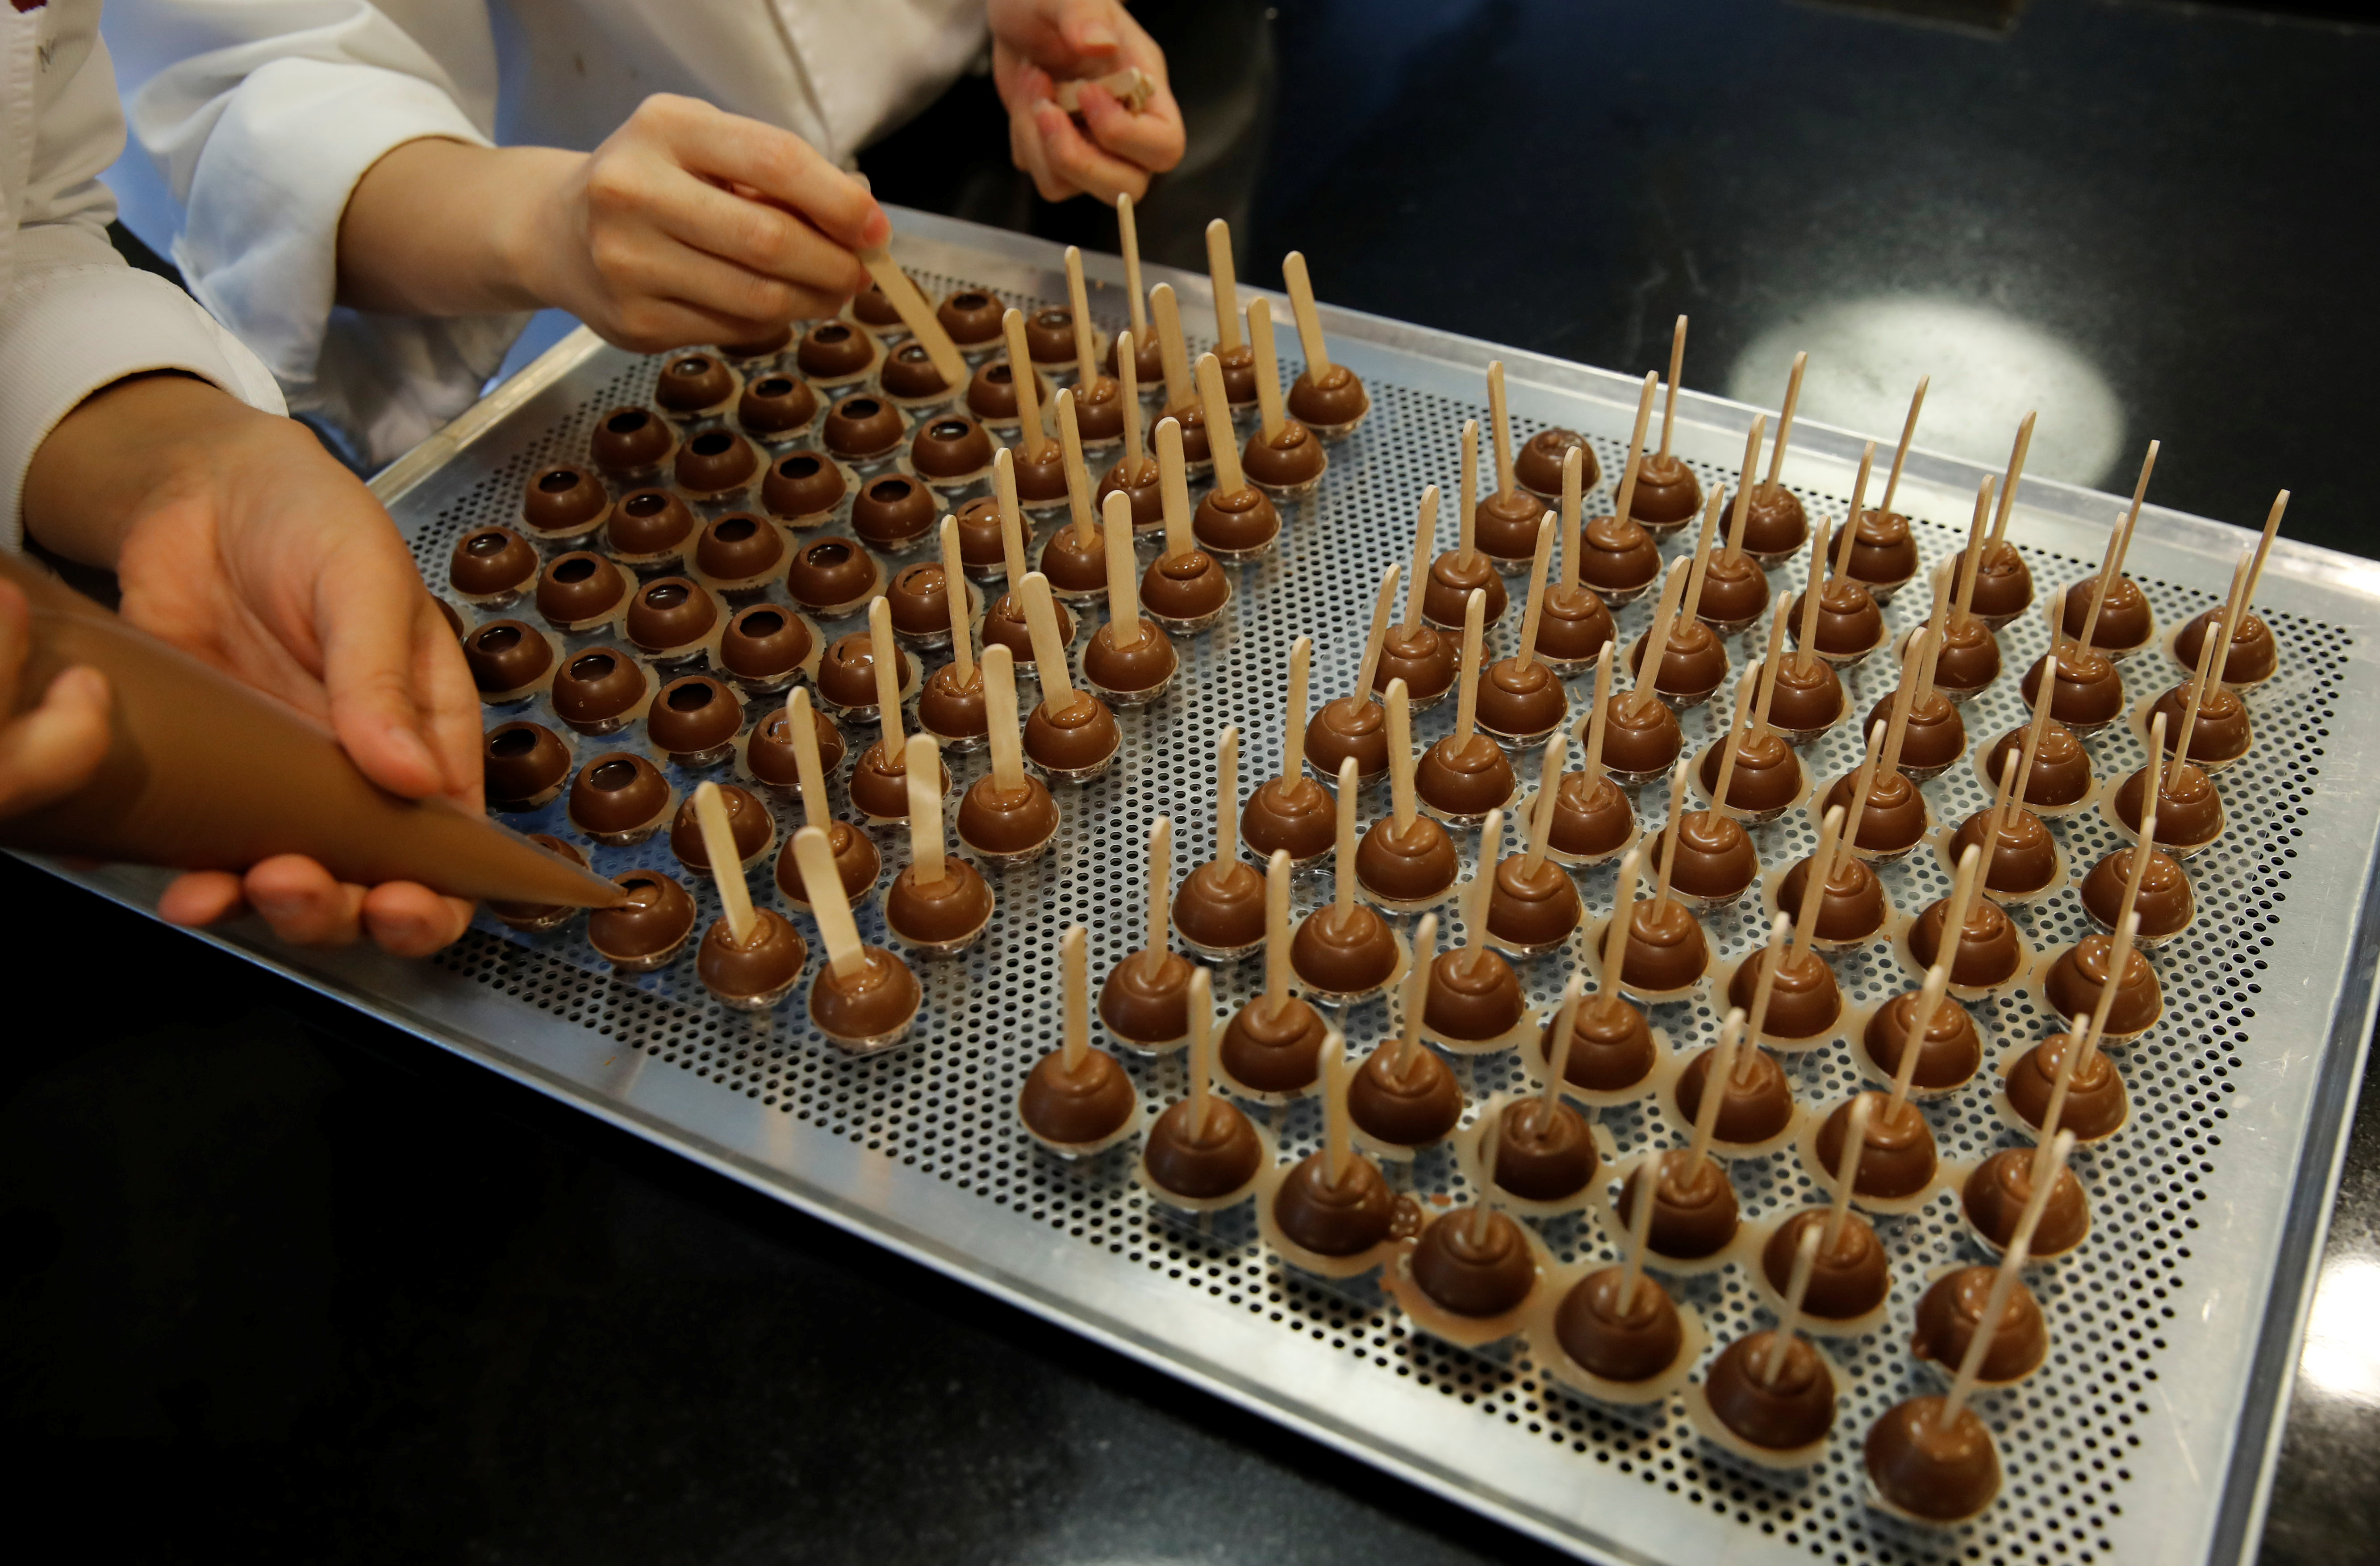 Empoyees of chocolate and cocoa product maker Barry Callebaut prepare chocolates in Zurich